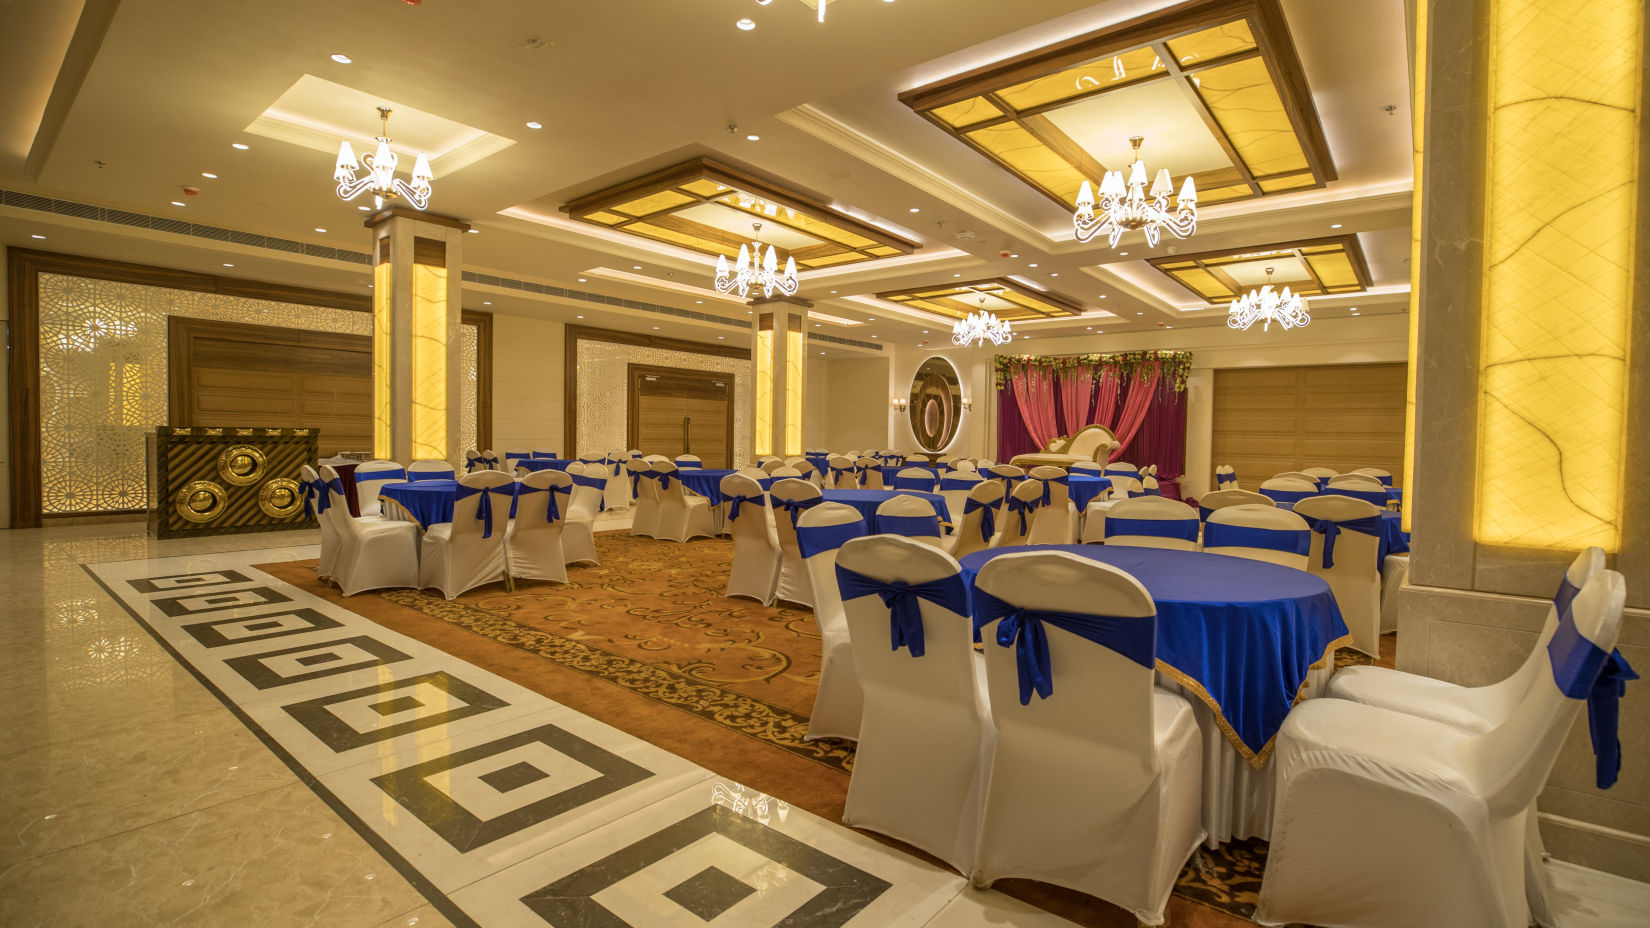 A well-lit Royal Velvet at Ramada by Wyndham Kapurthala equipped with lavish decors